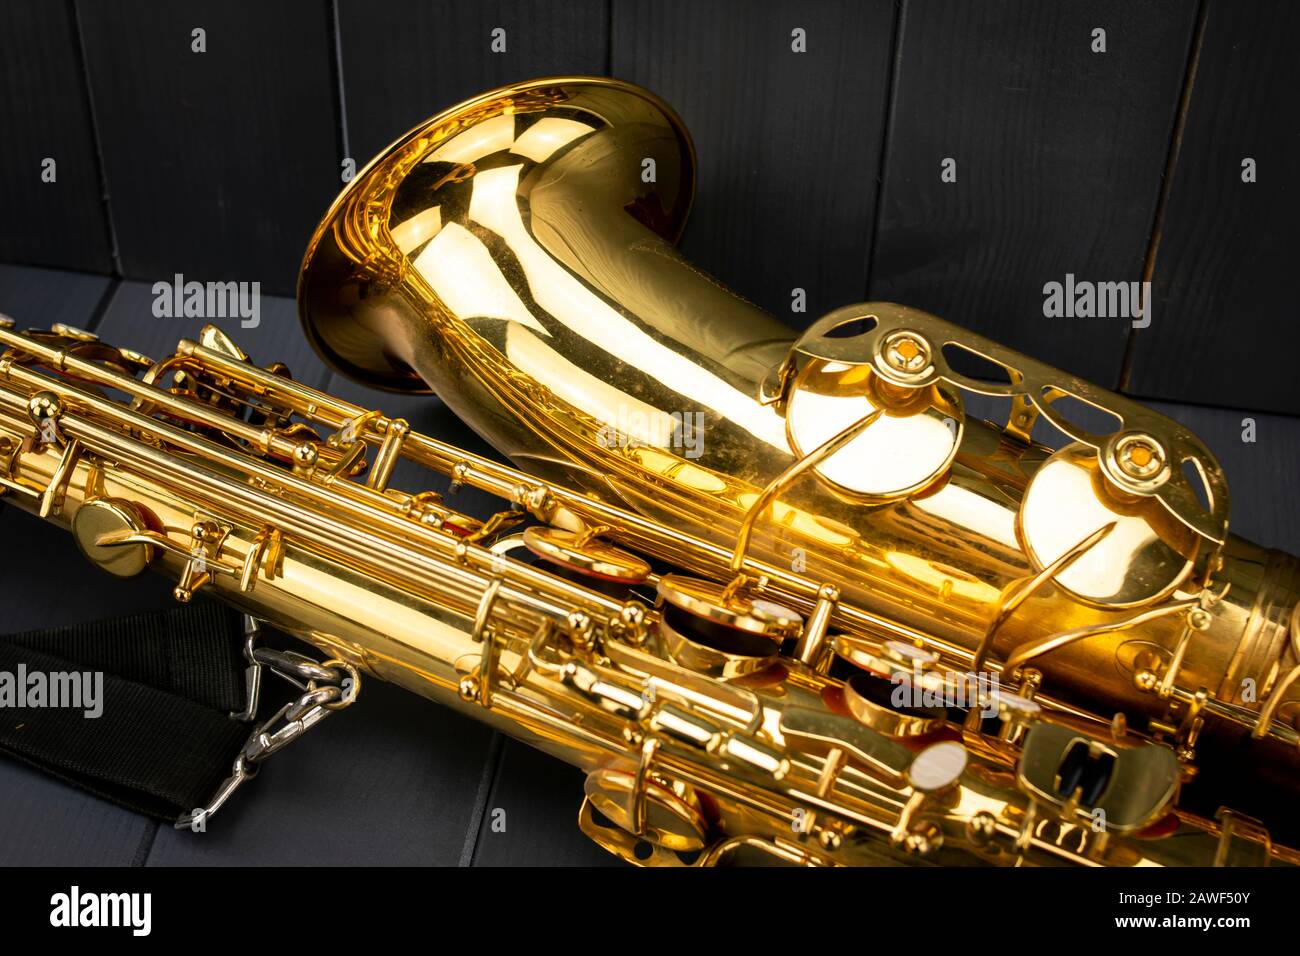 Bell and body of a golden and shiny saxophone with strap on gray wooden background Stock Photo